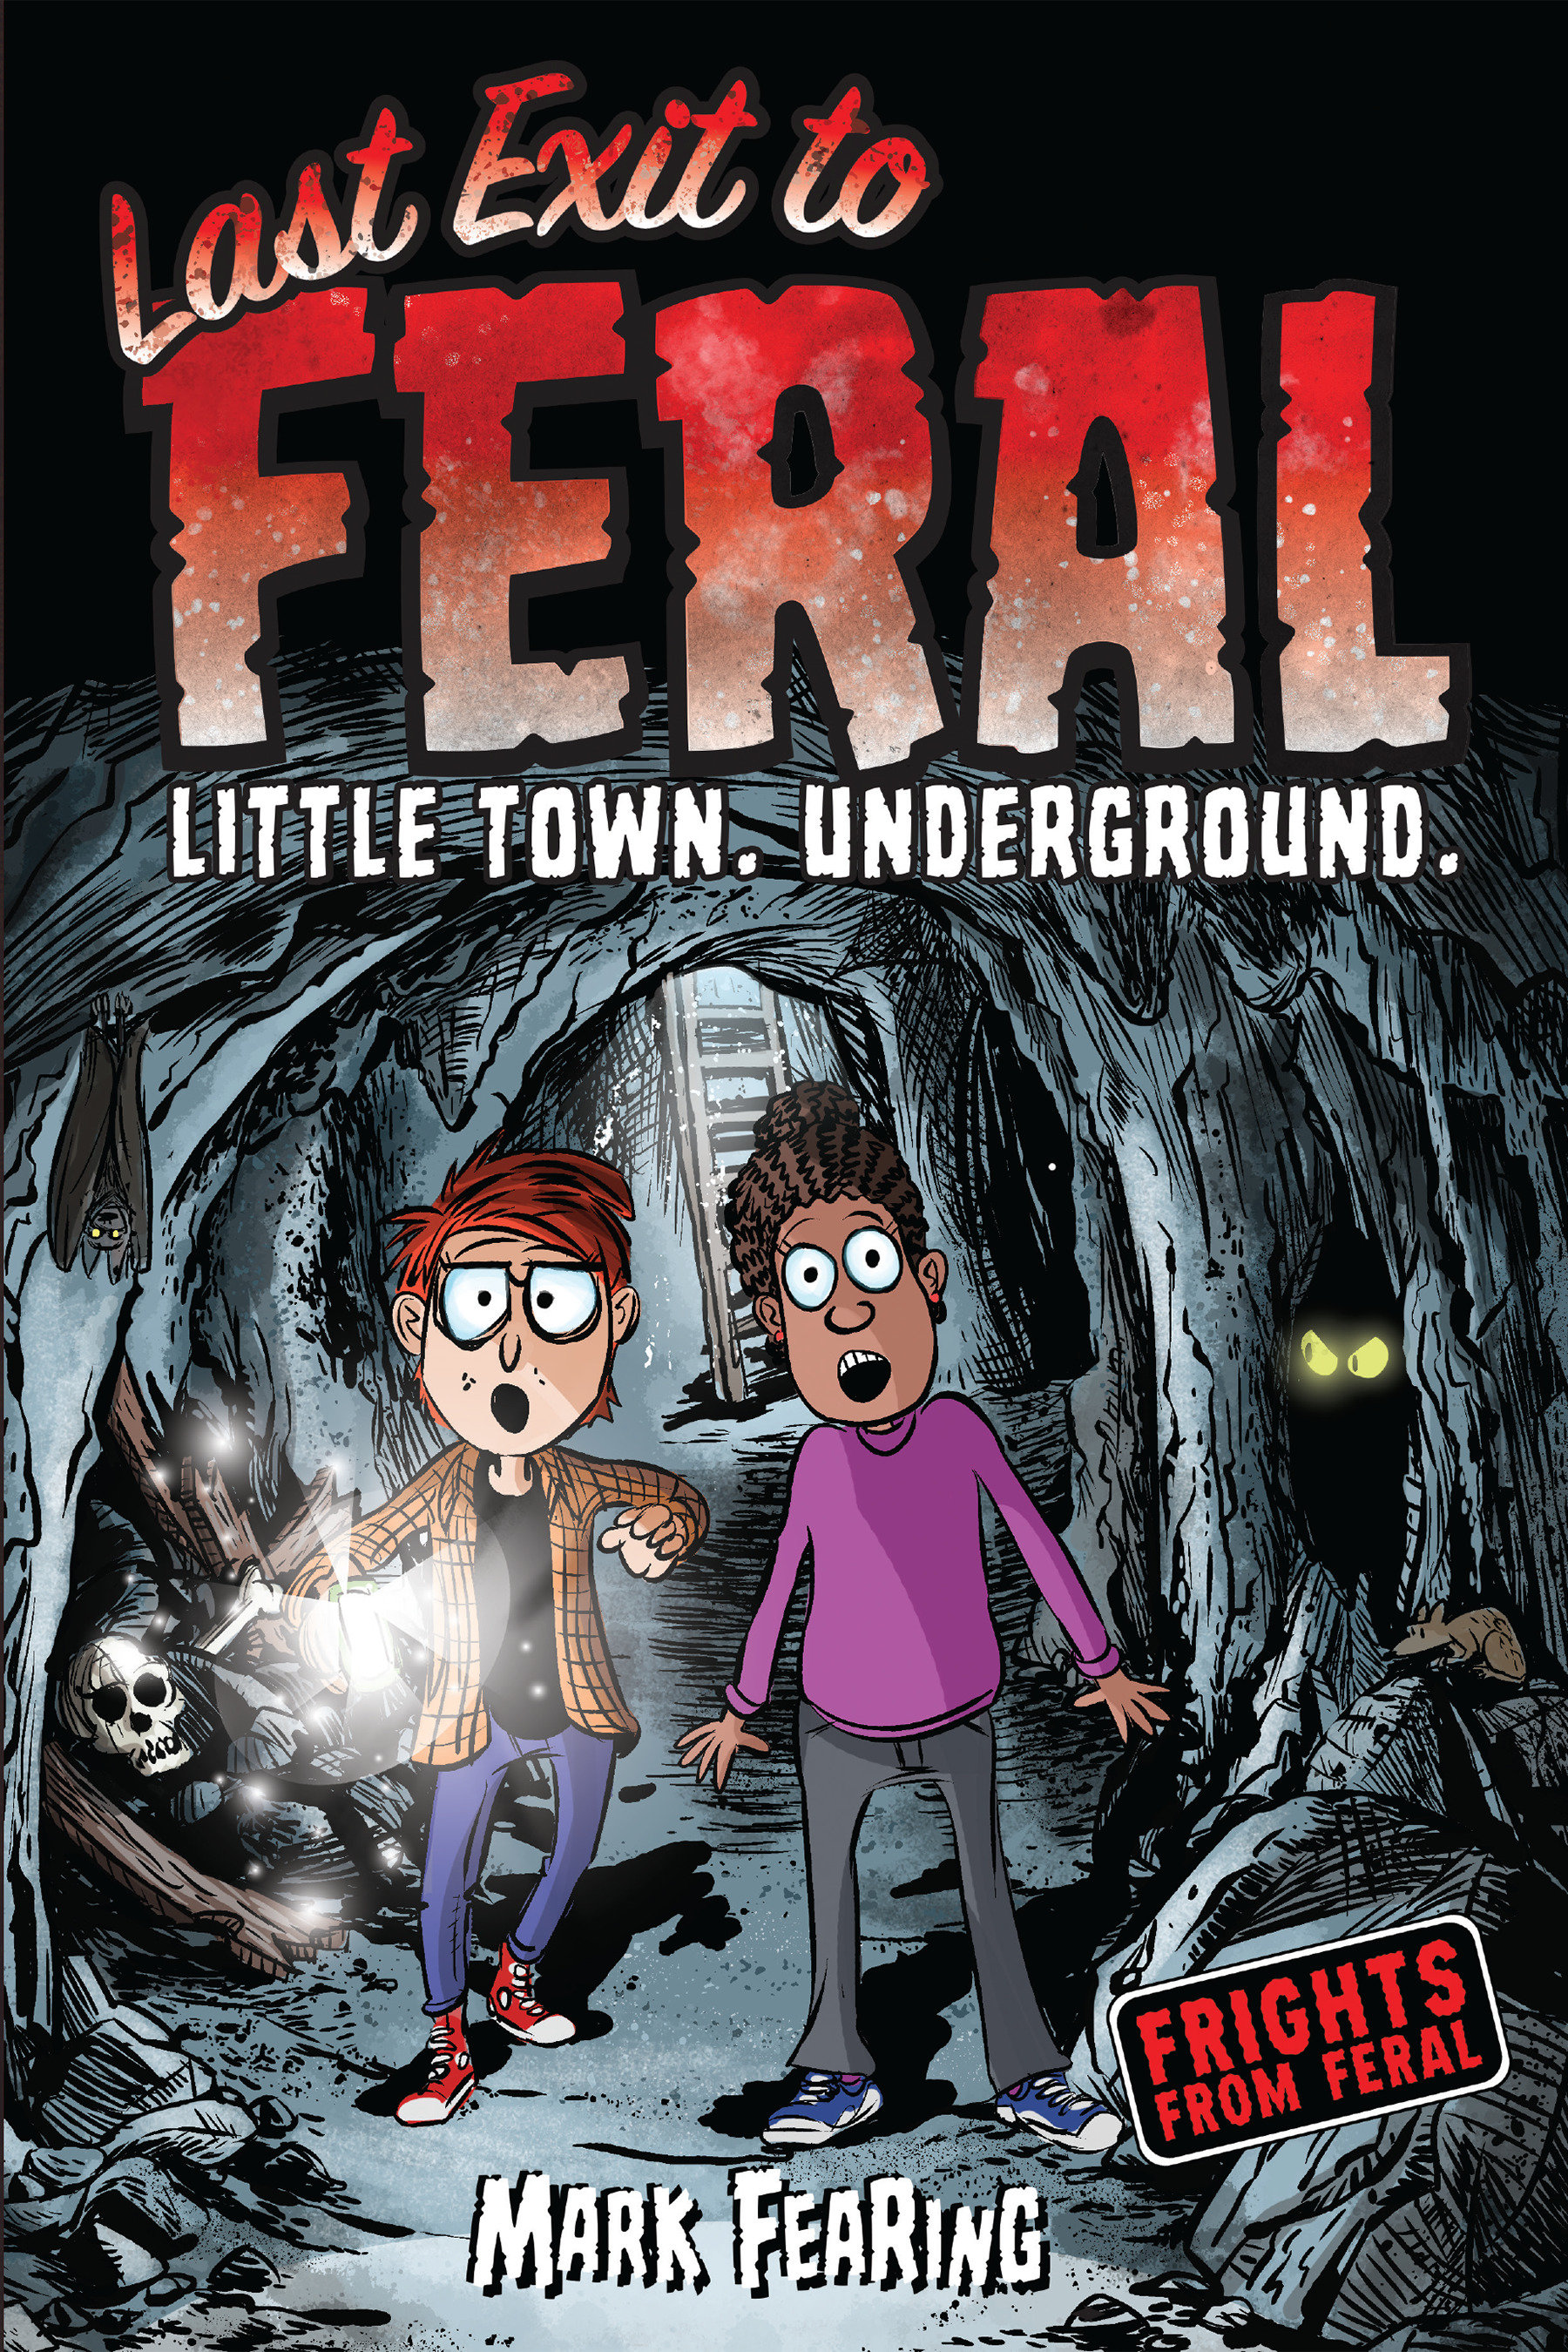 Welcome To Feral Graphic Novel Volume 2 Last Exit To Feral